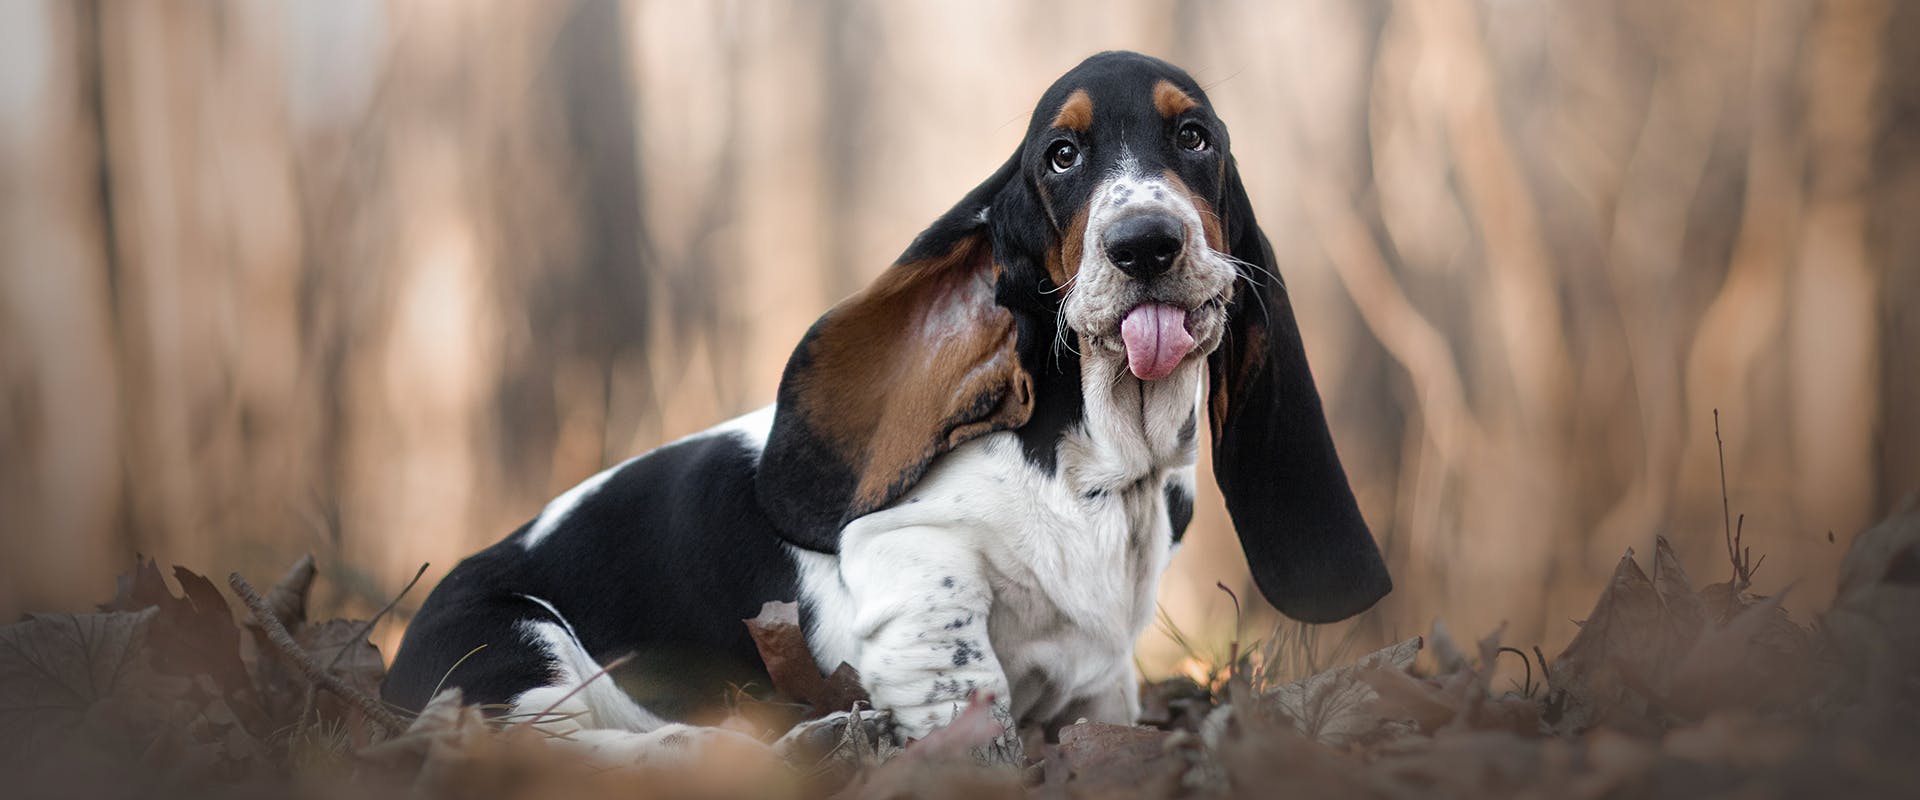 A cute Basset Hound puppy in the woods